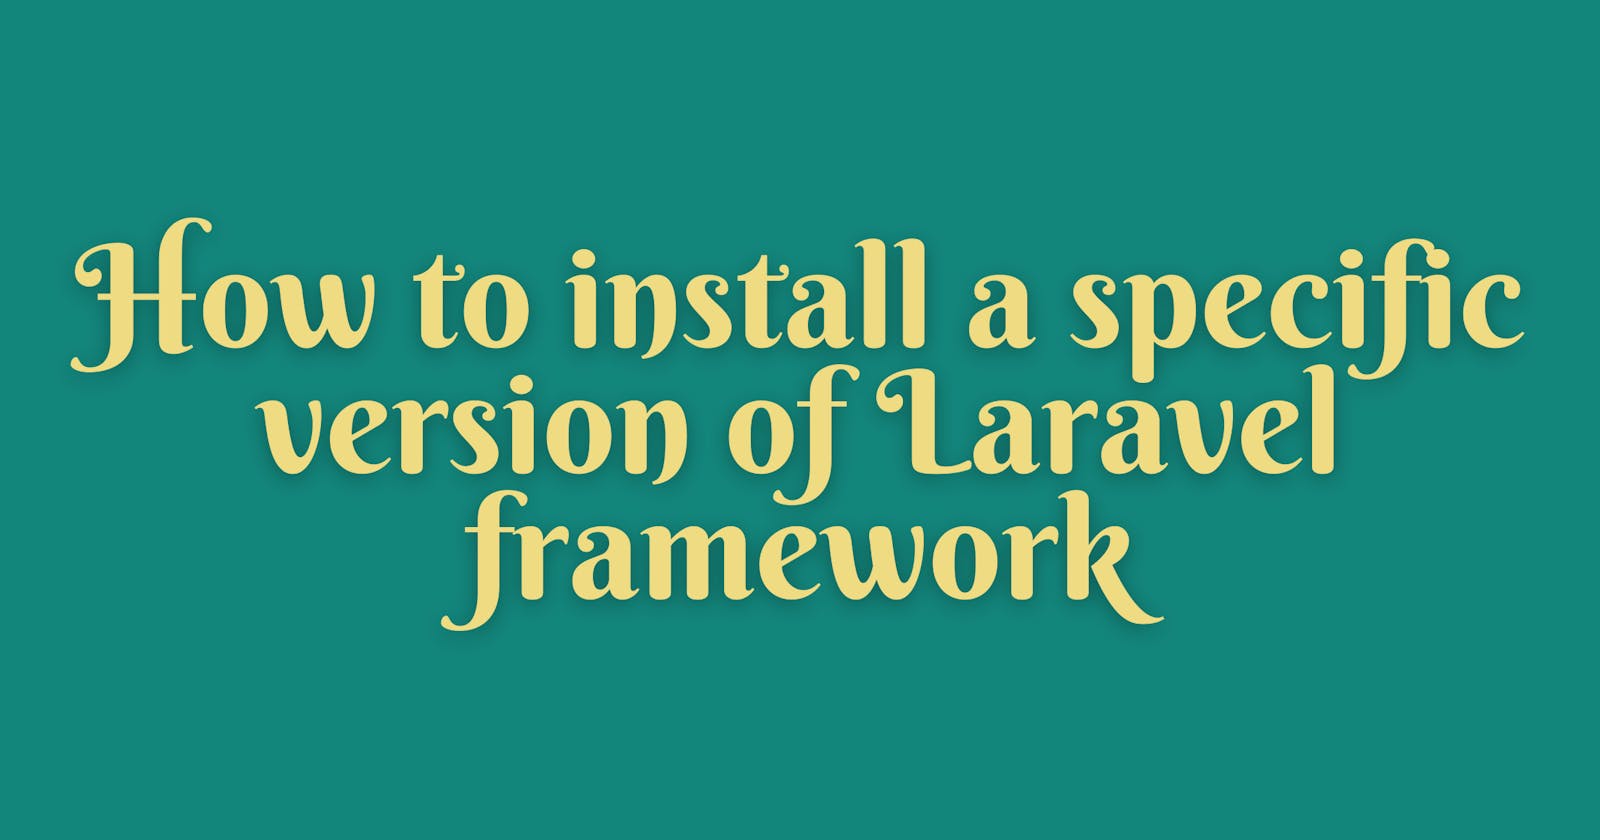 How to install a specific version of Laravel framework